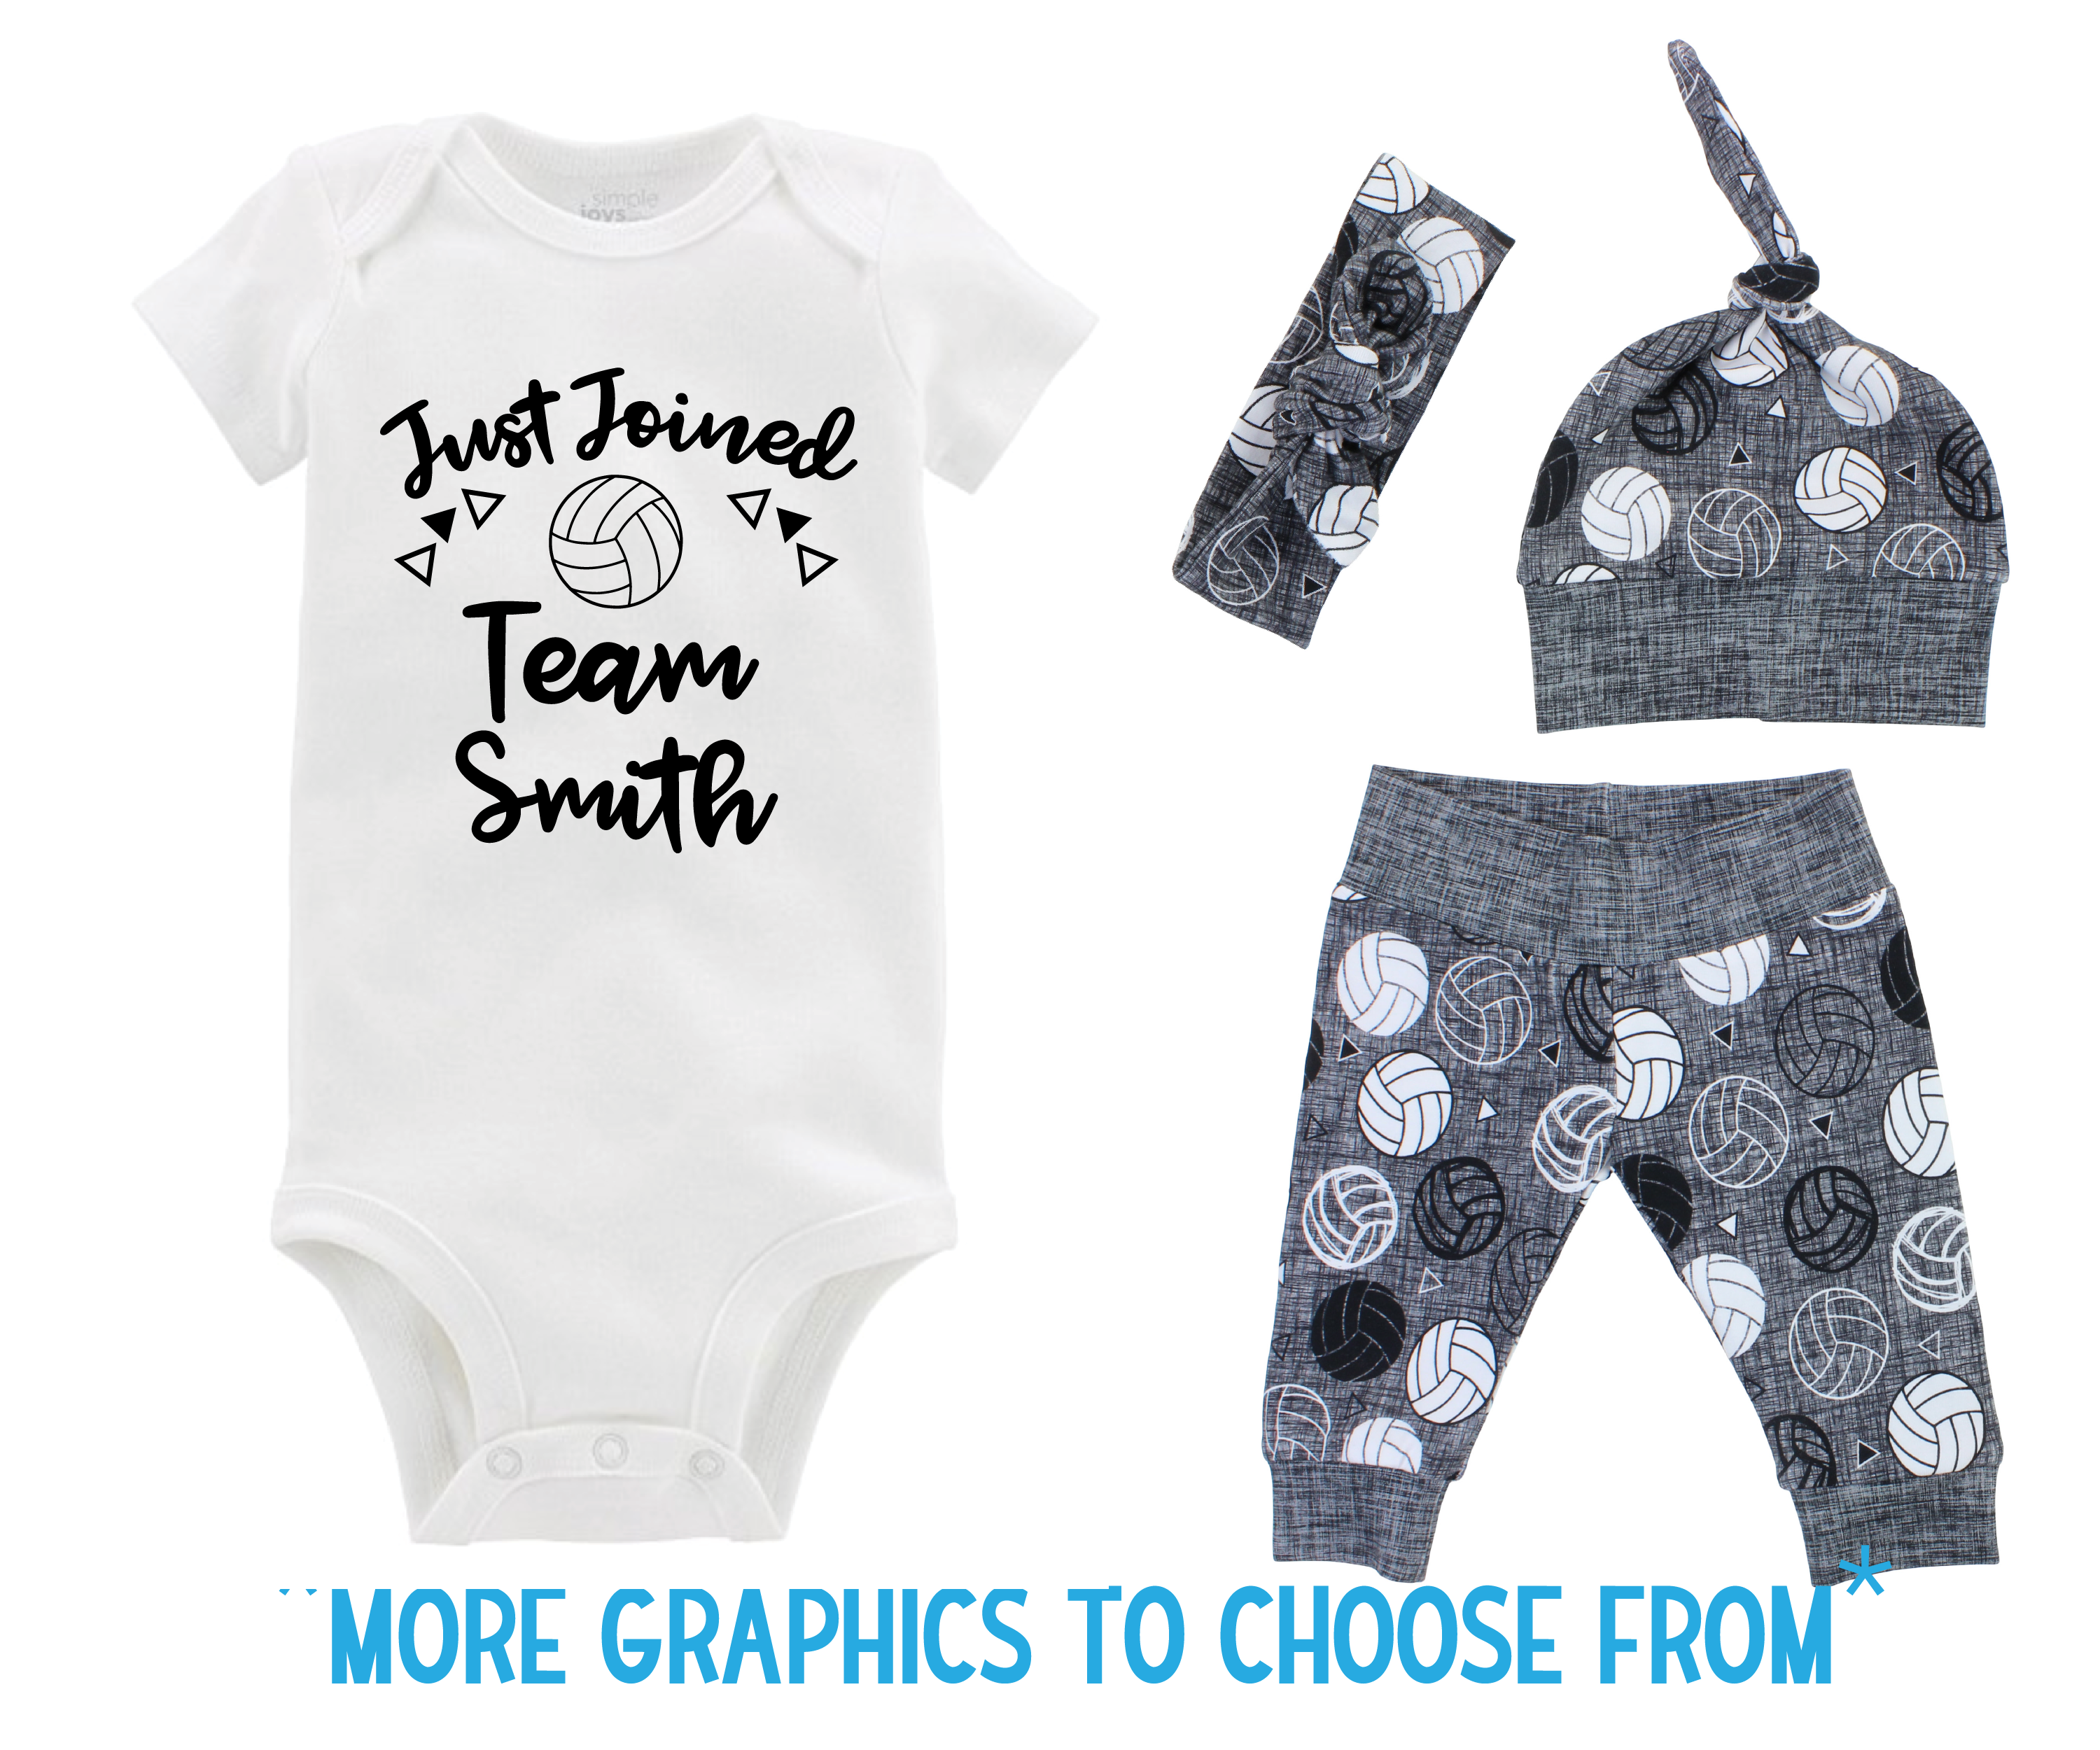 Gray Volleyball Baby Outfit